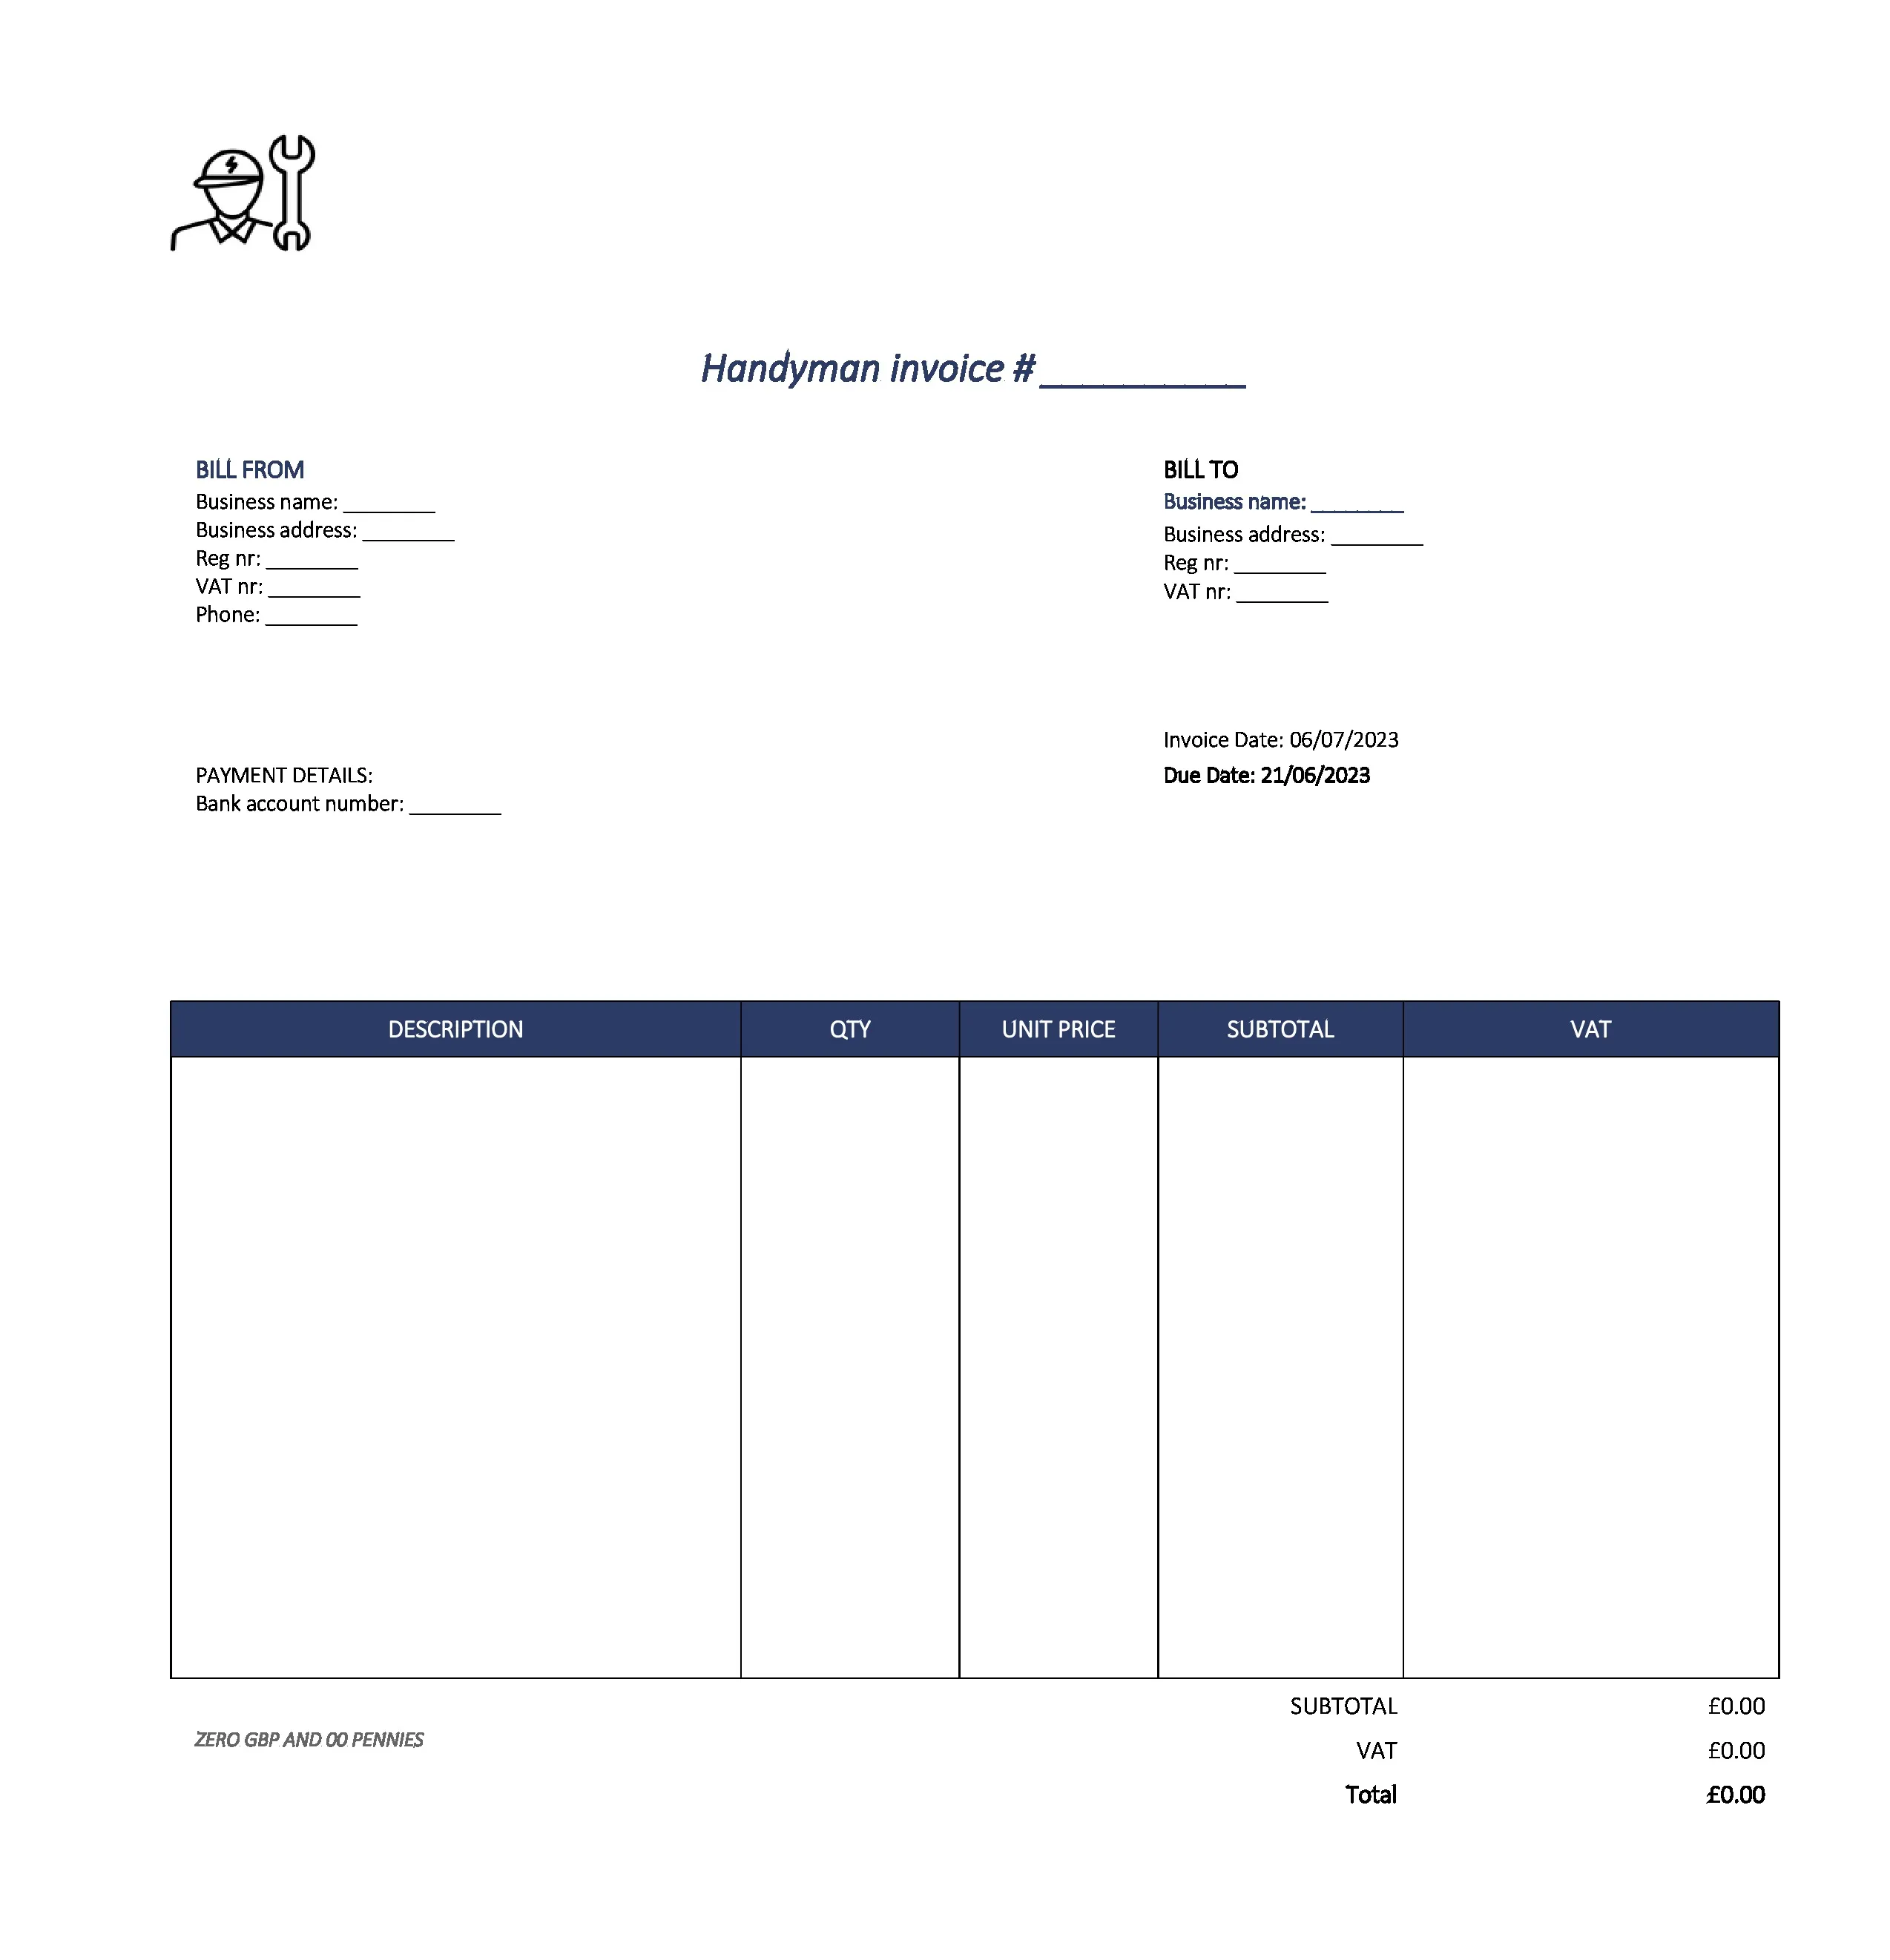 detailed handyman invoice template UK Excel / Google sheets